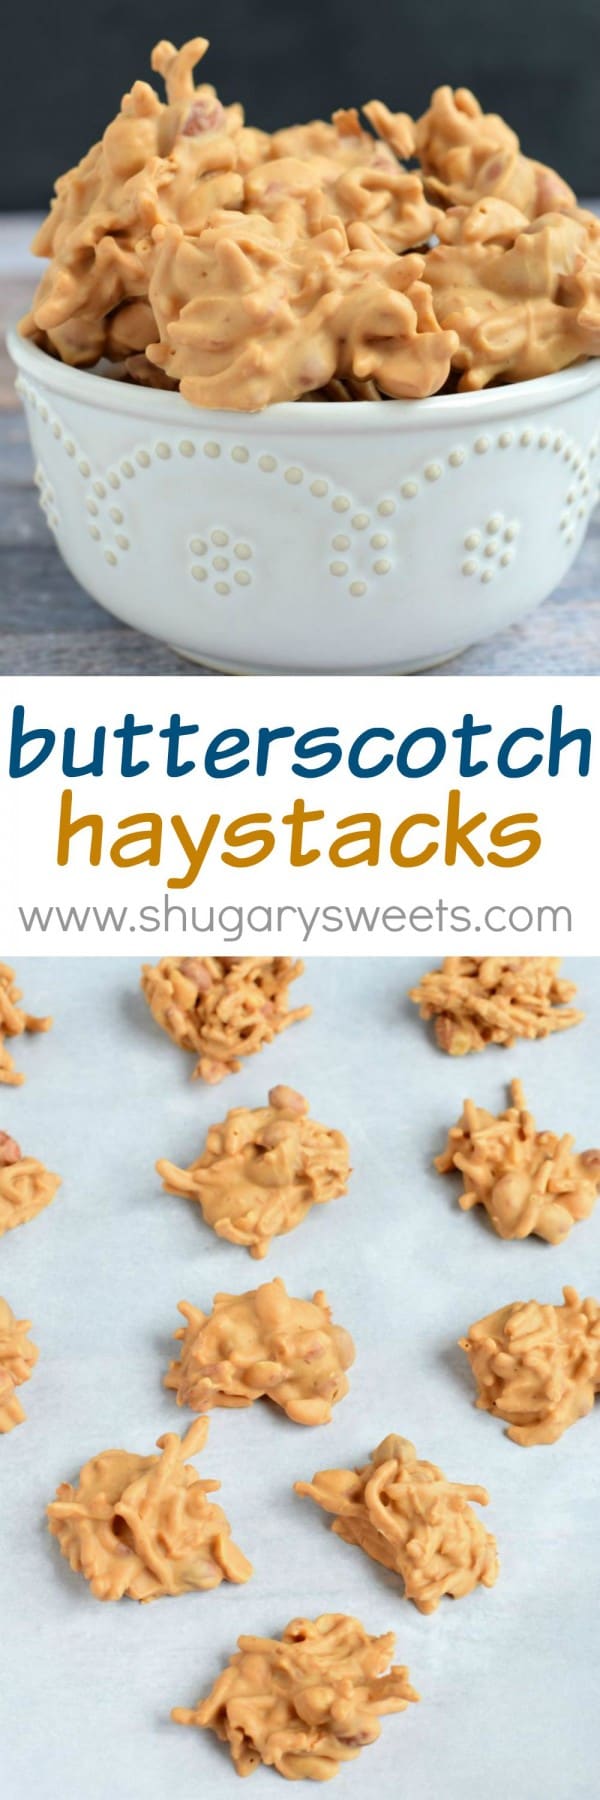 No Bake Haystack Cookies are just the thing to satisfy your intense sweet tooth cravings. It’s the ideal recipe for little hands to help, too!